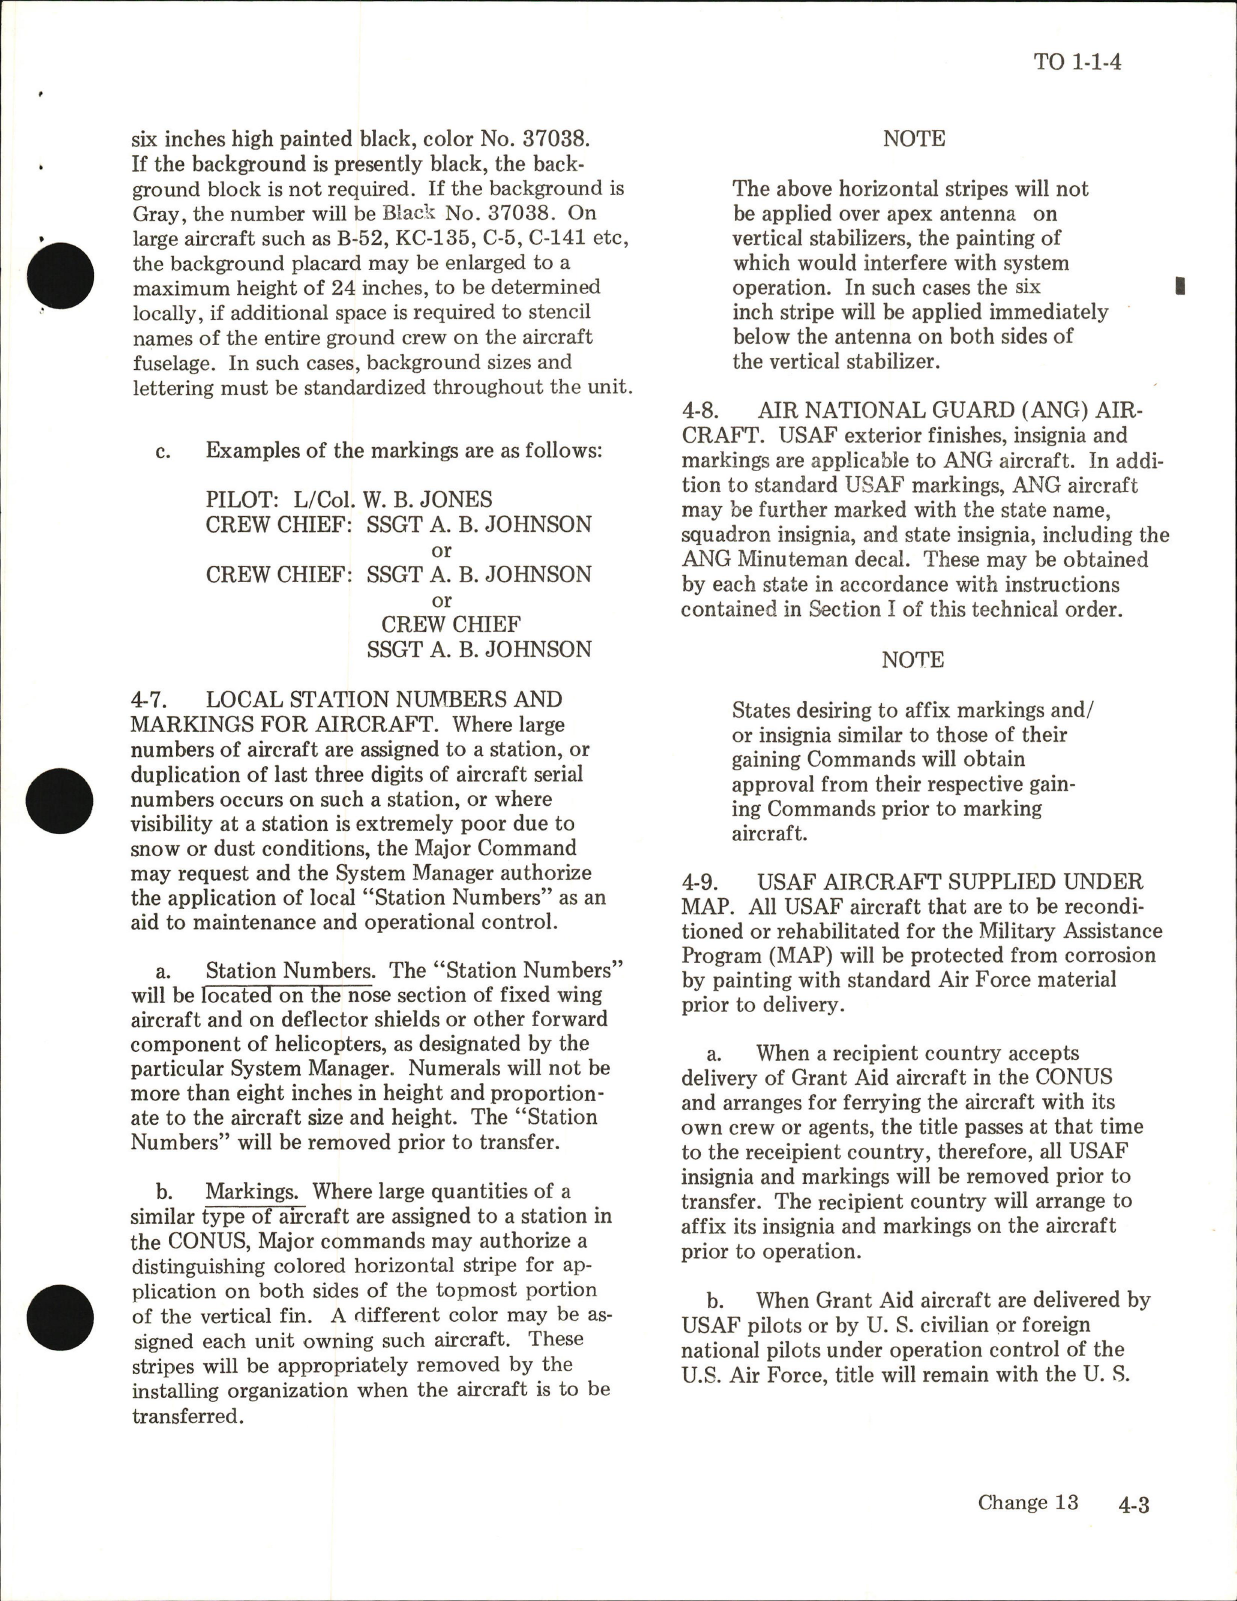 Sample page 5 from AirCorps Library document: Exterior Finishes, Insignia and Markings for USAF Aircraft - Change - 13